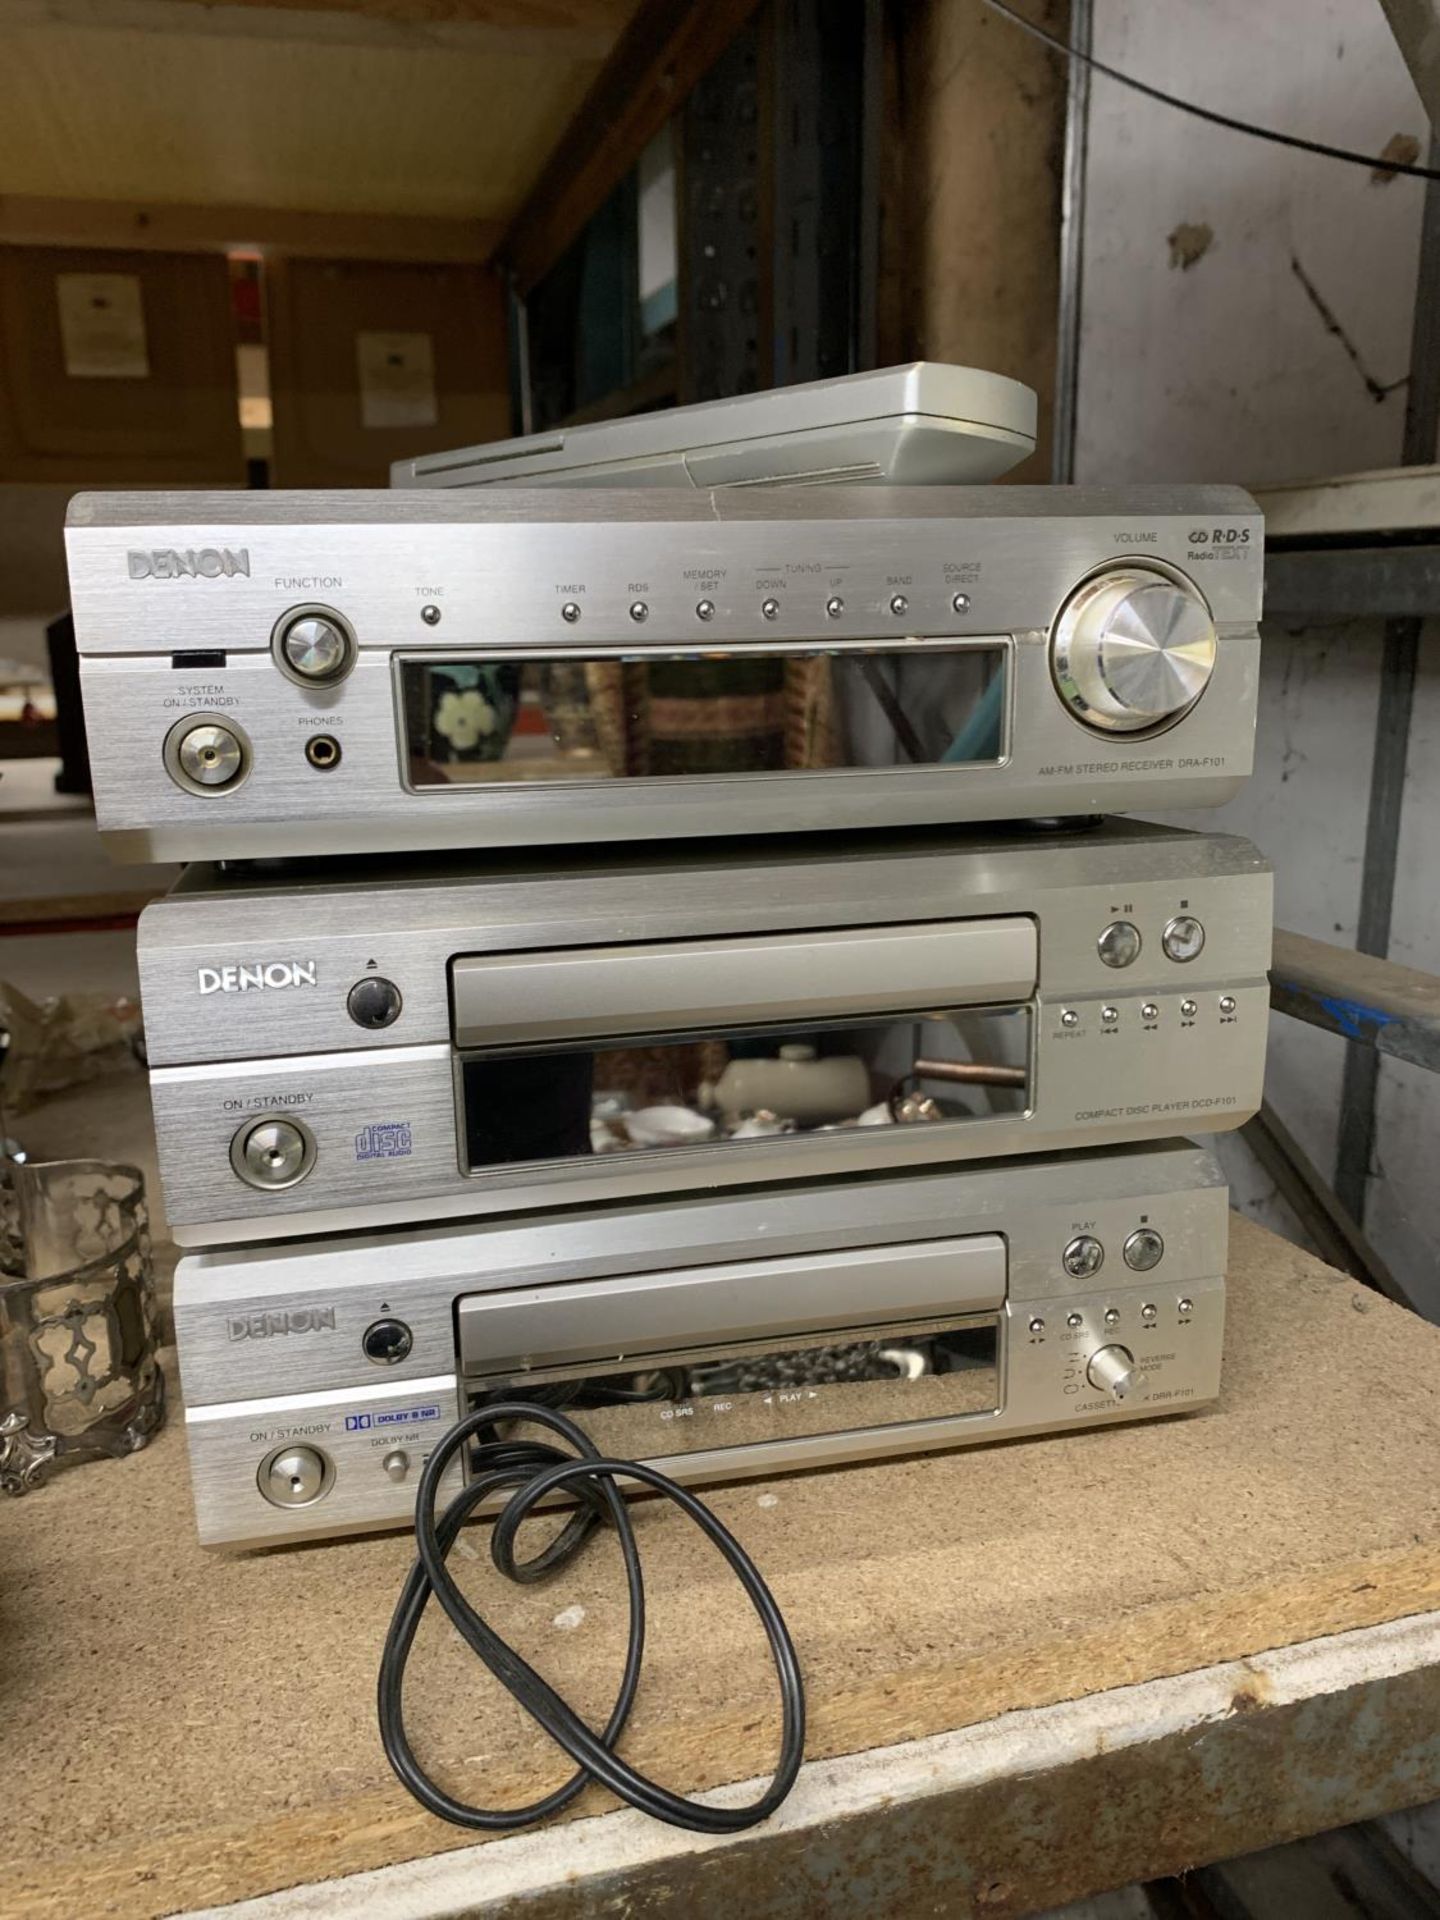 THREE RARE DENON SEPERATES WITH REMOTE CONTROL TO INCLUDE A STEREO RECEIVER, COMPACT DISC PLAYER AND